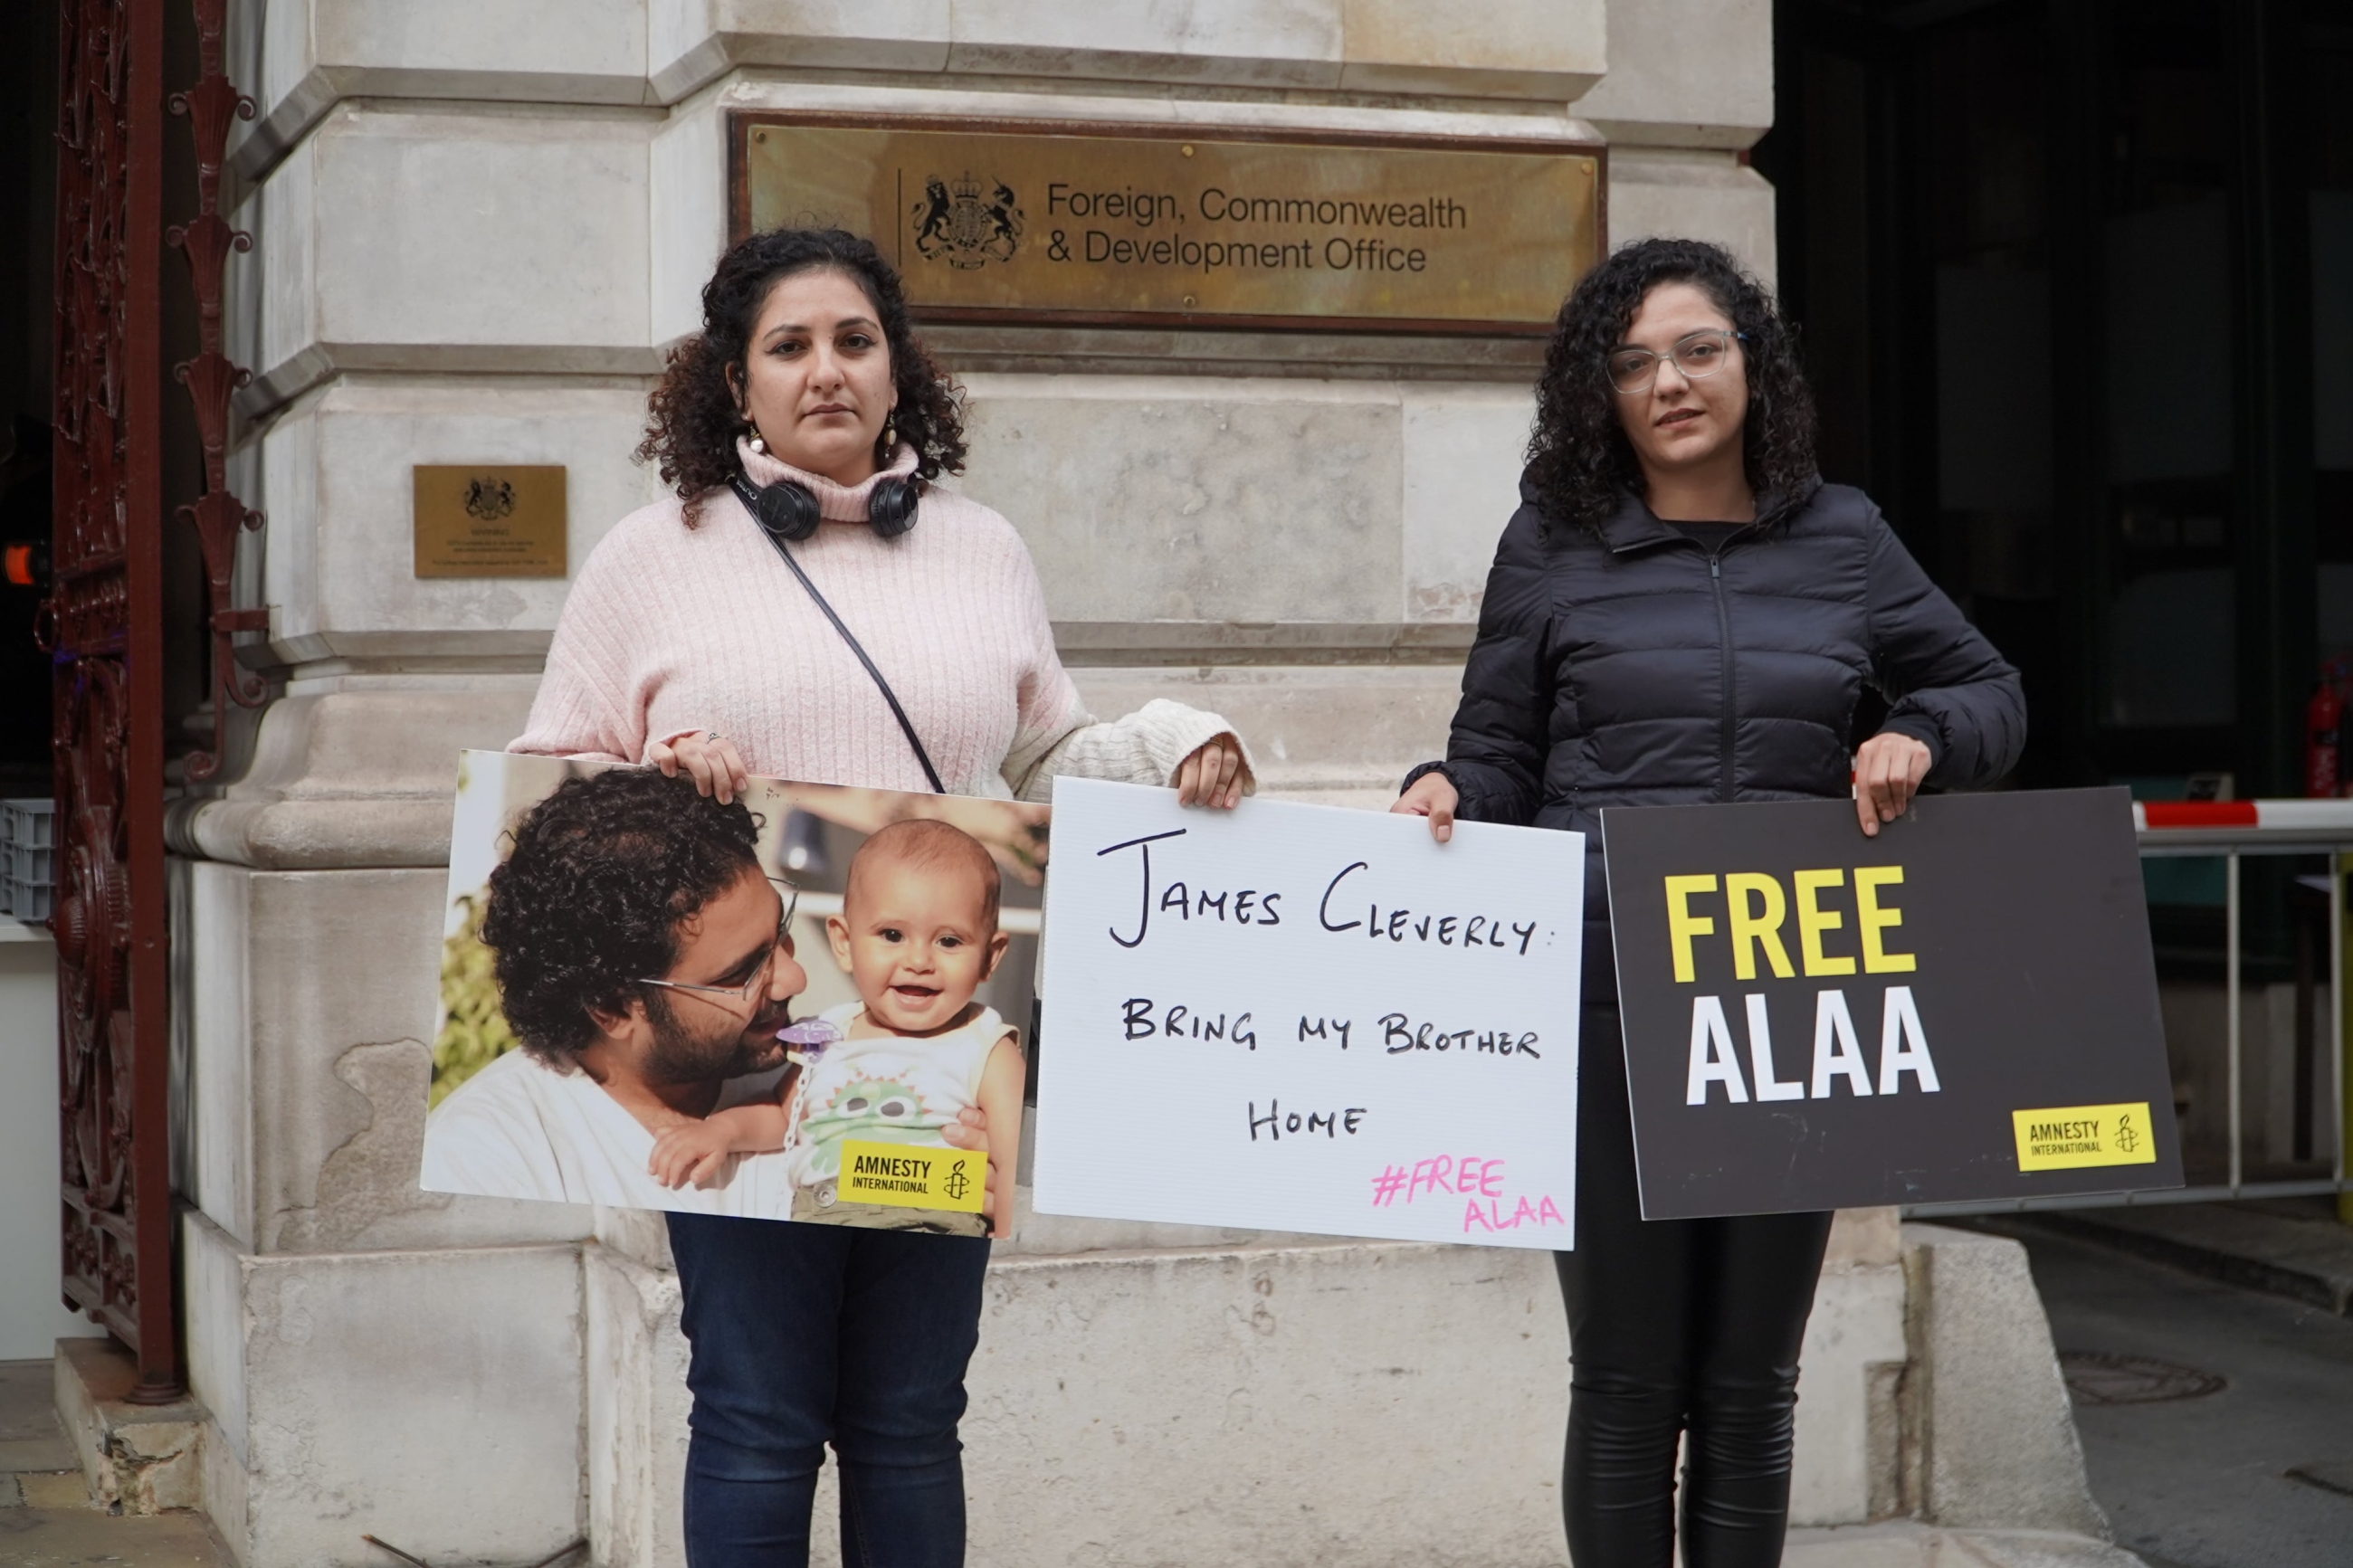 Mona Seif (L) and Sanaa Seif (R), sisters of Alaa Abdel Fattah, protest outside the British foreign office in London on 19 October 2022 (MEE/Khaled Shalaby)